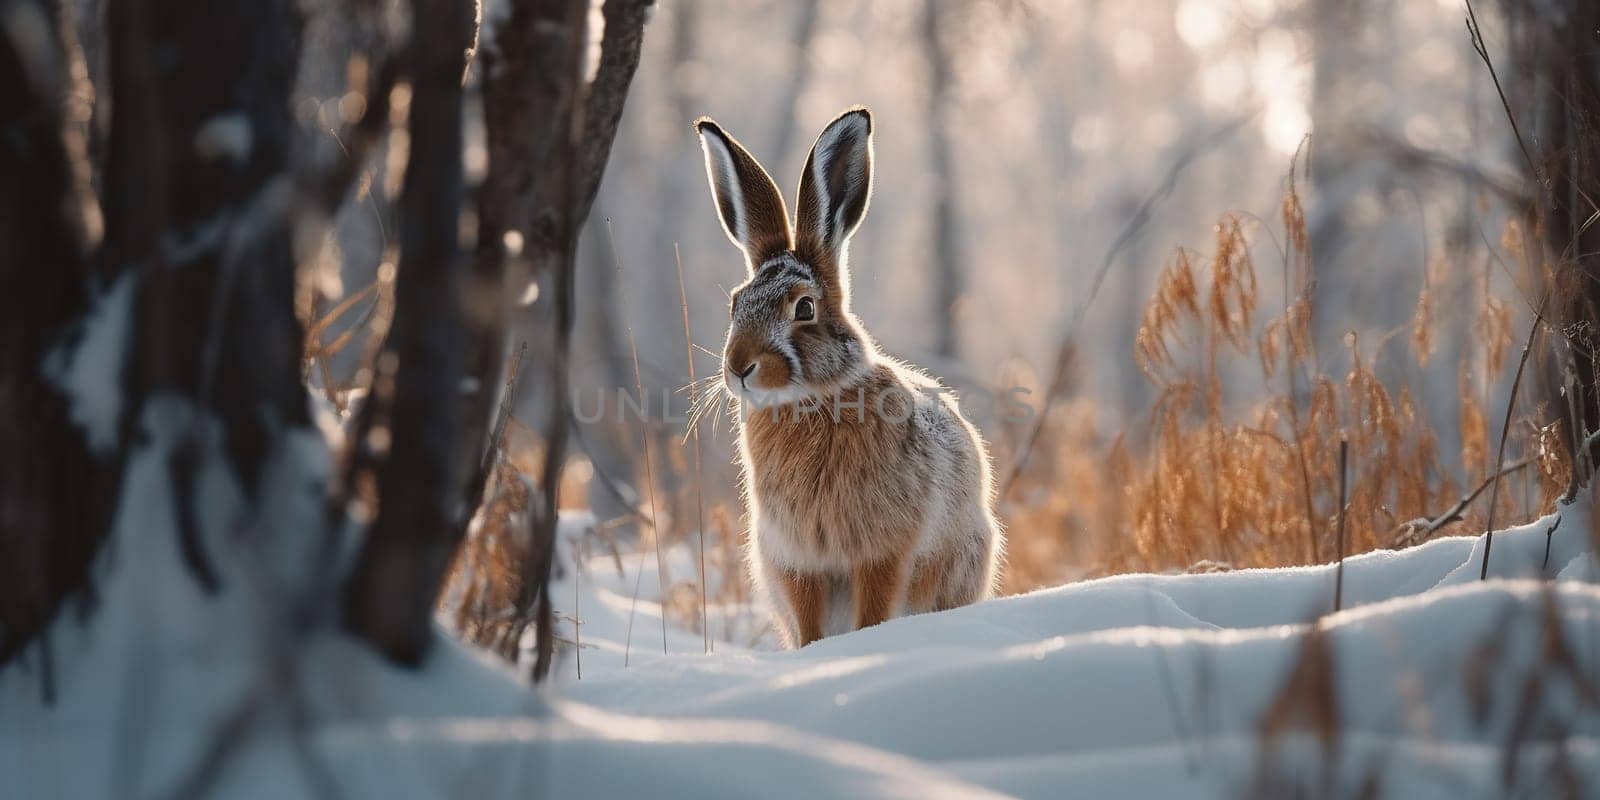 Big Wild Hare In The Snow In Winter Forest by tan4ikk1